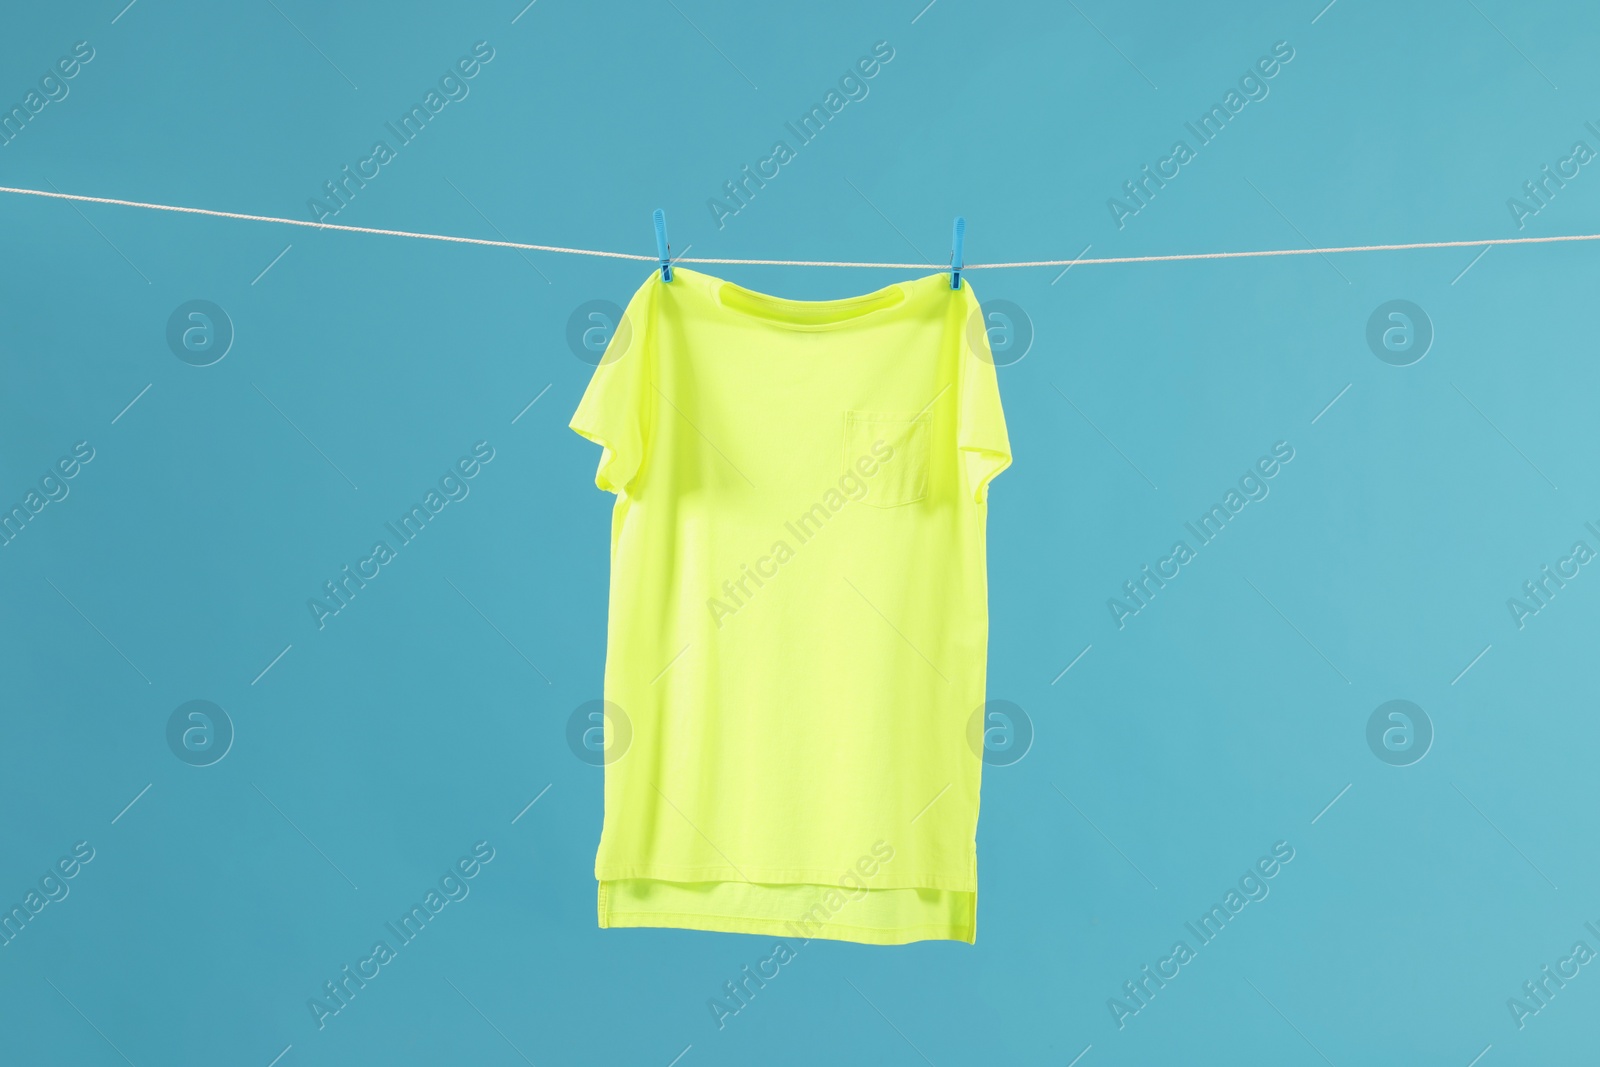 Photo of One green t-shirt drying on washing line against light blue background